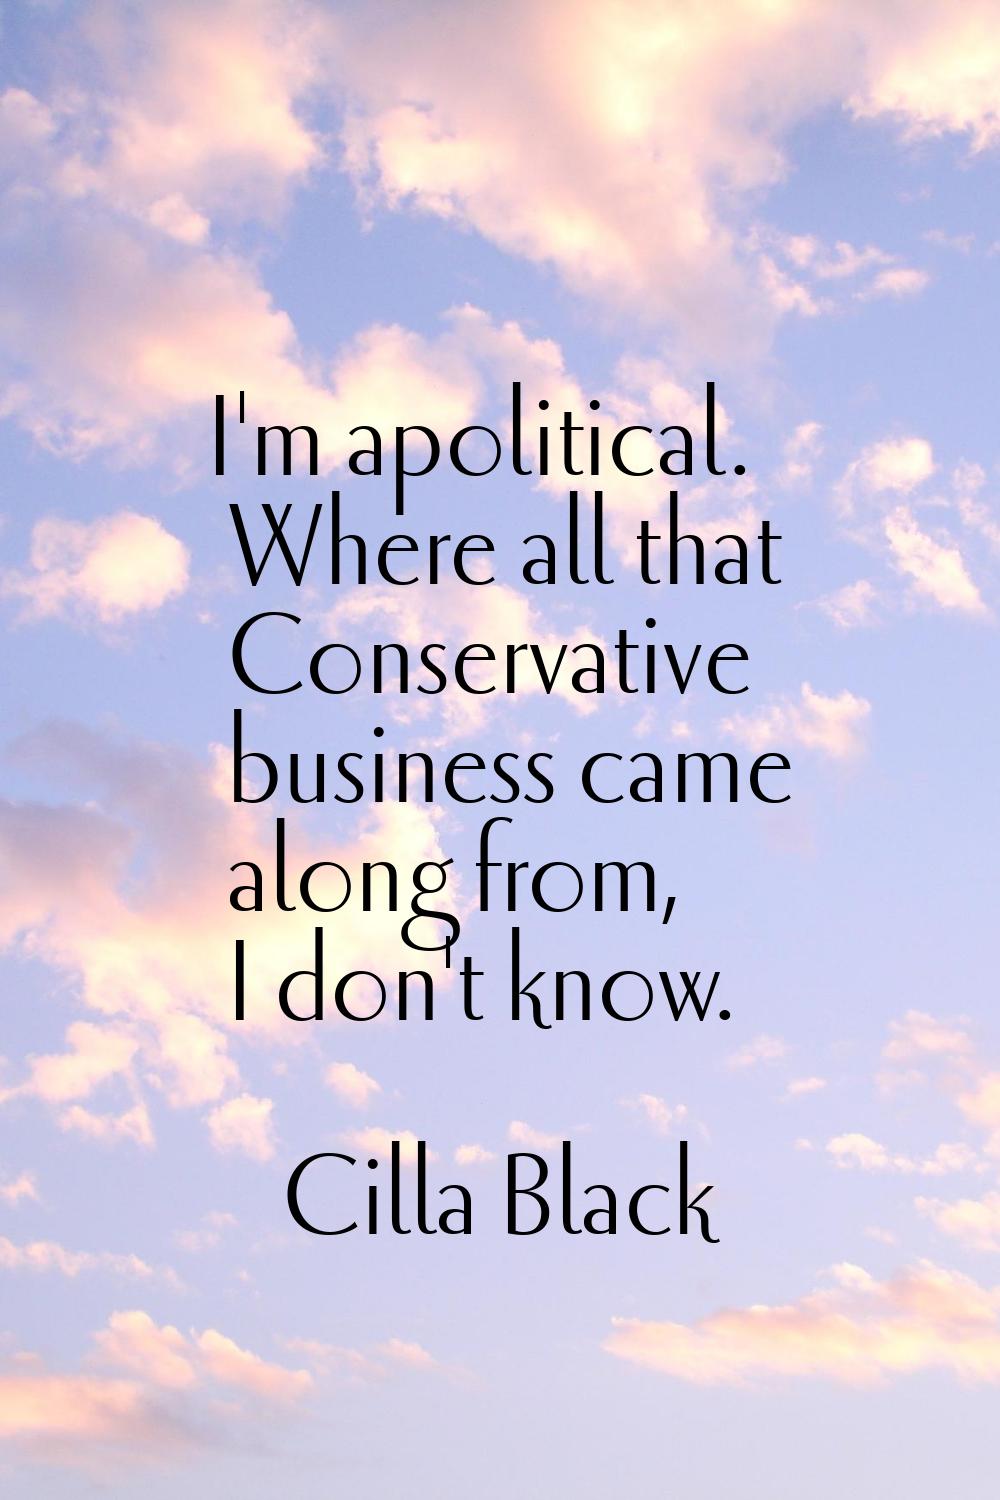 I'm apolitical. Where all that Conservative business came along from, I don't know.